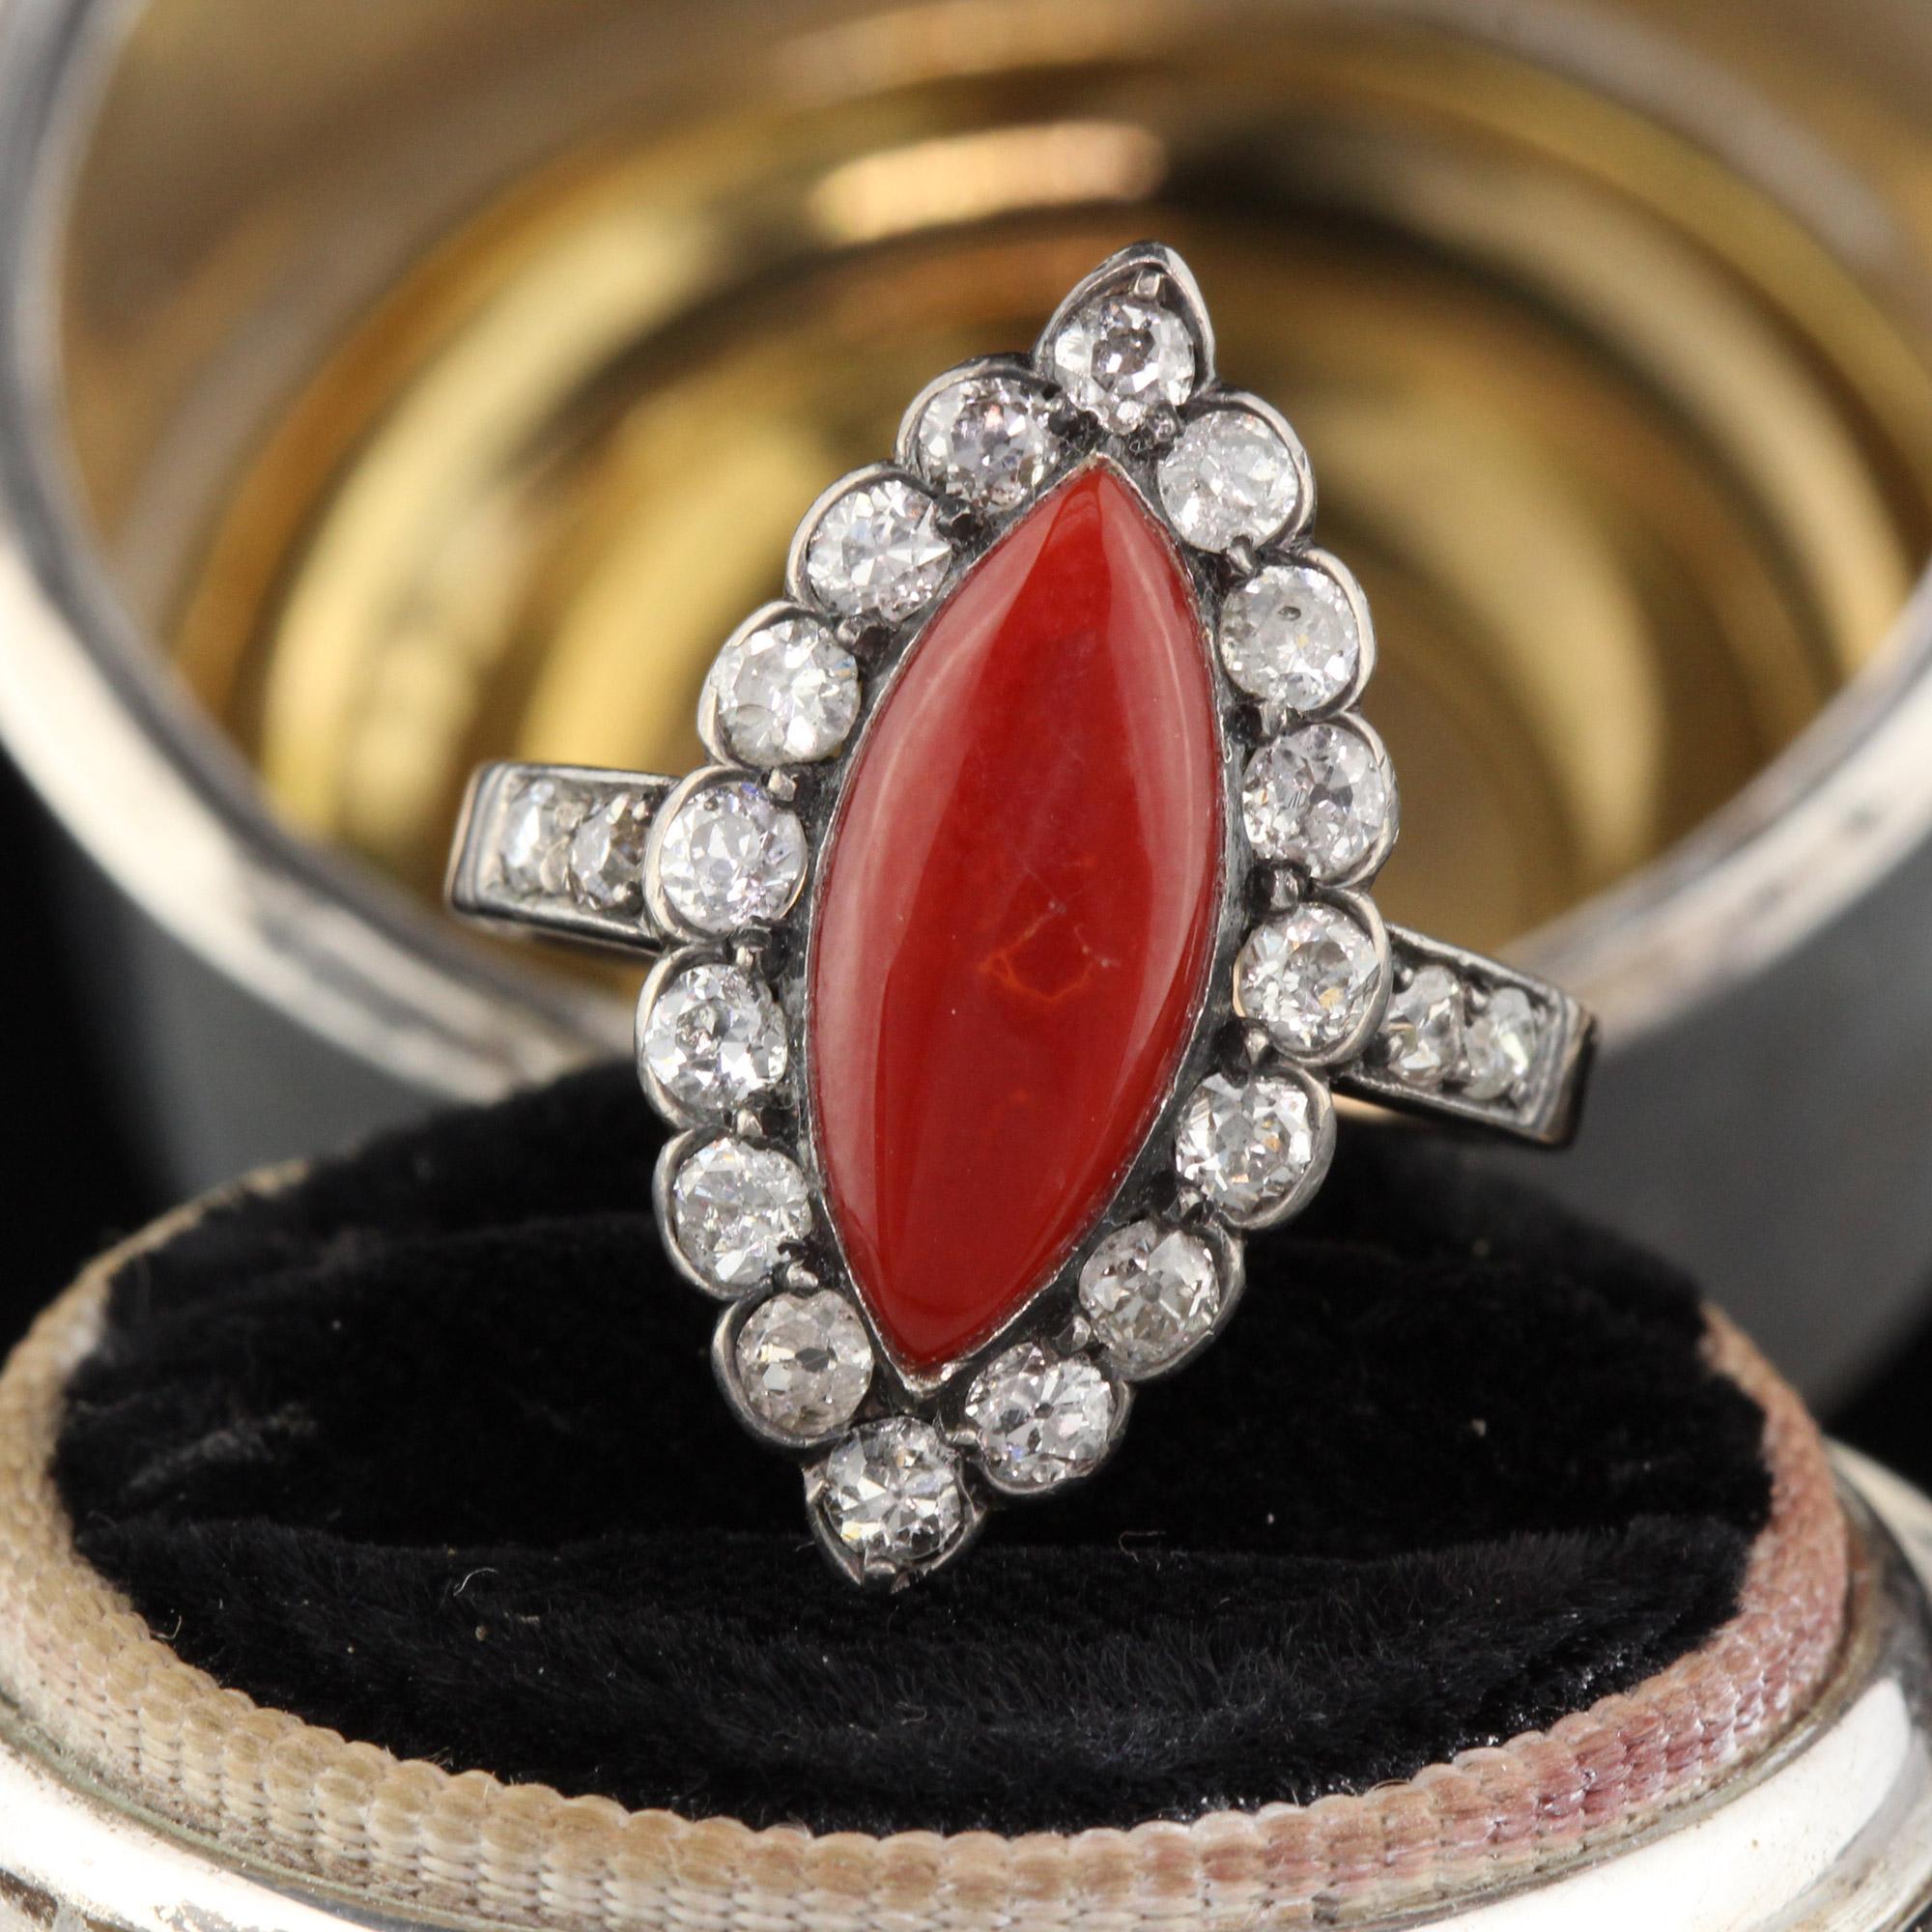 This is a gorgeous antique victorian coral and diamond ring. It is in excellent condition.

#R0003

Metal: 18K Yellow Gold and Silver Top

Weight: 3.2 Grams

Total Diamond Weight: Approximately 1 cts

Diamond Color: H

Diamond Clarity: SI2

Ring